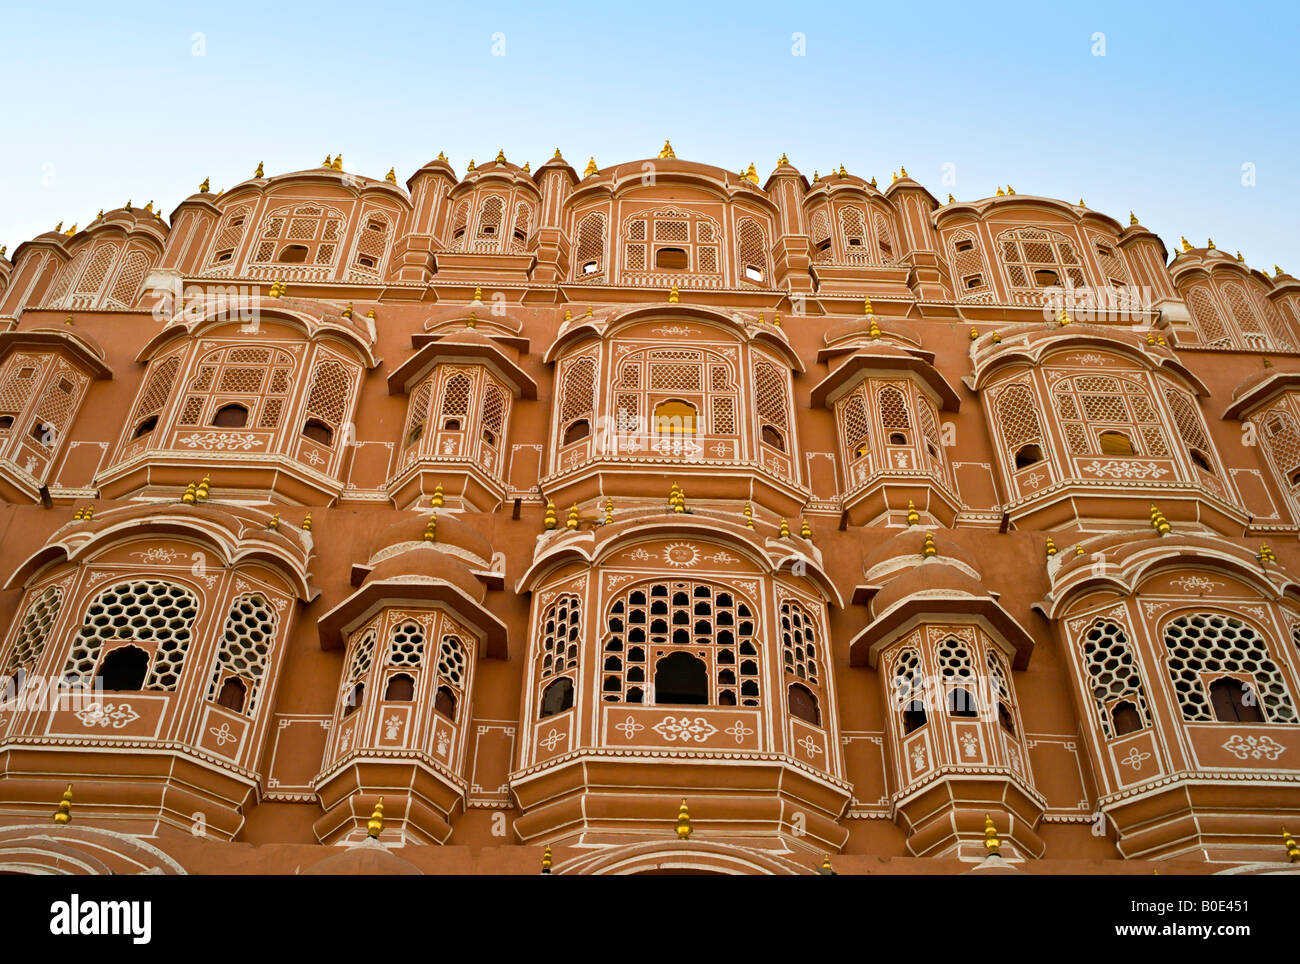 INDIA JAIPUR Hawa Mahal, also known as the Wind Palace, is a palace built in the form of the crown of Krishna the Hindu god. Stock Photo